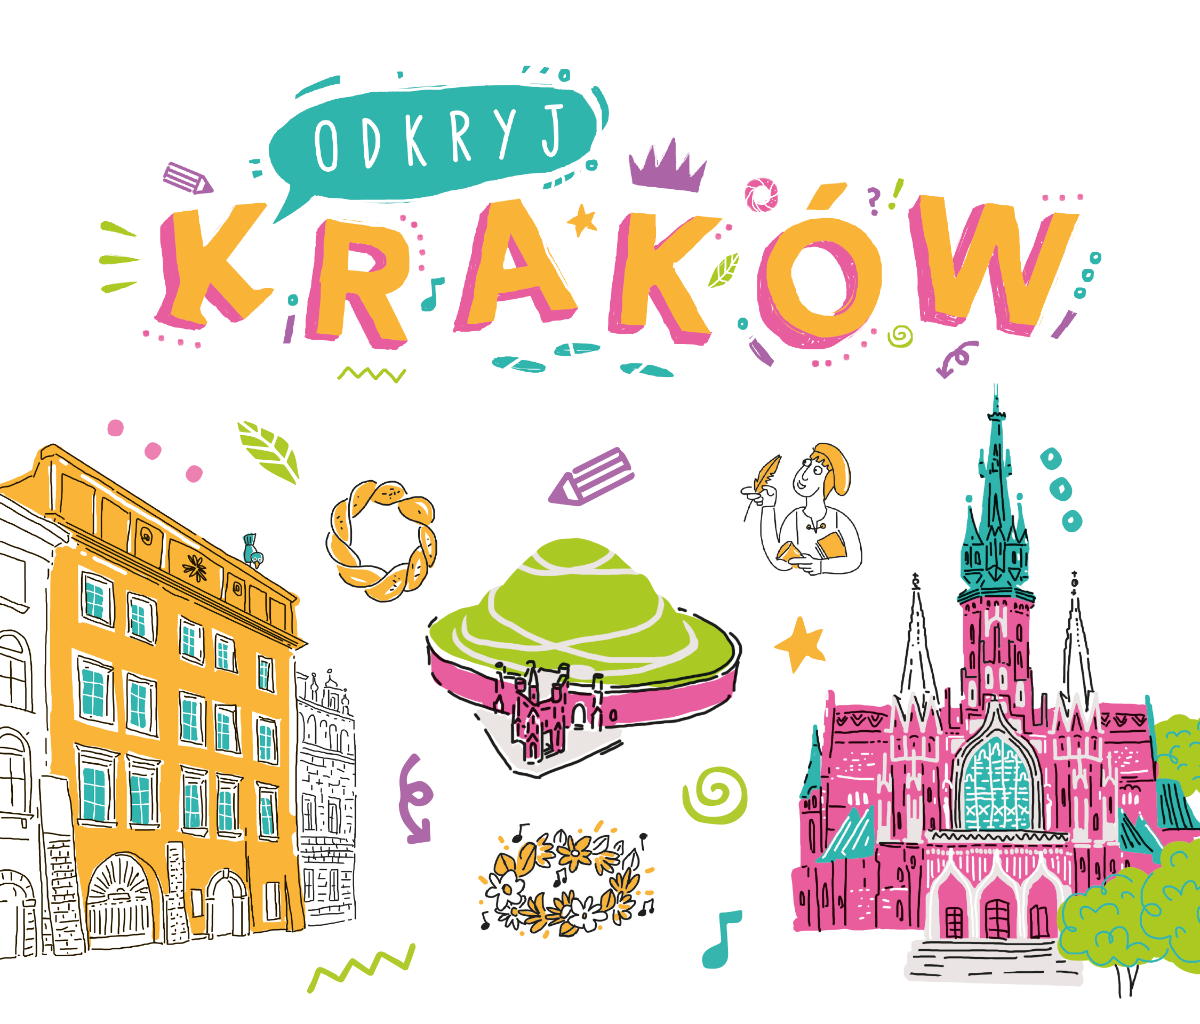 Living with your family in Krakow